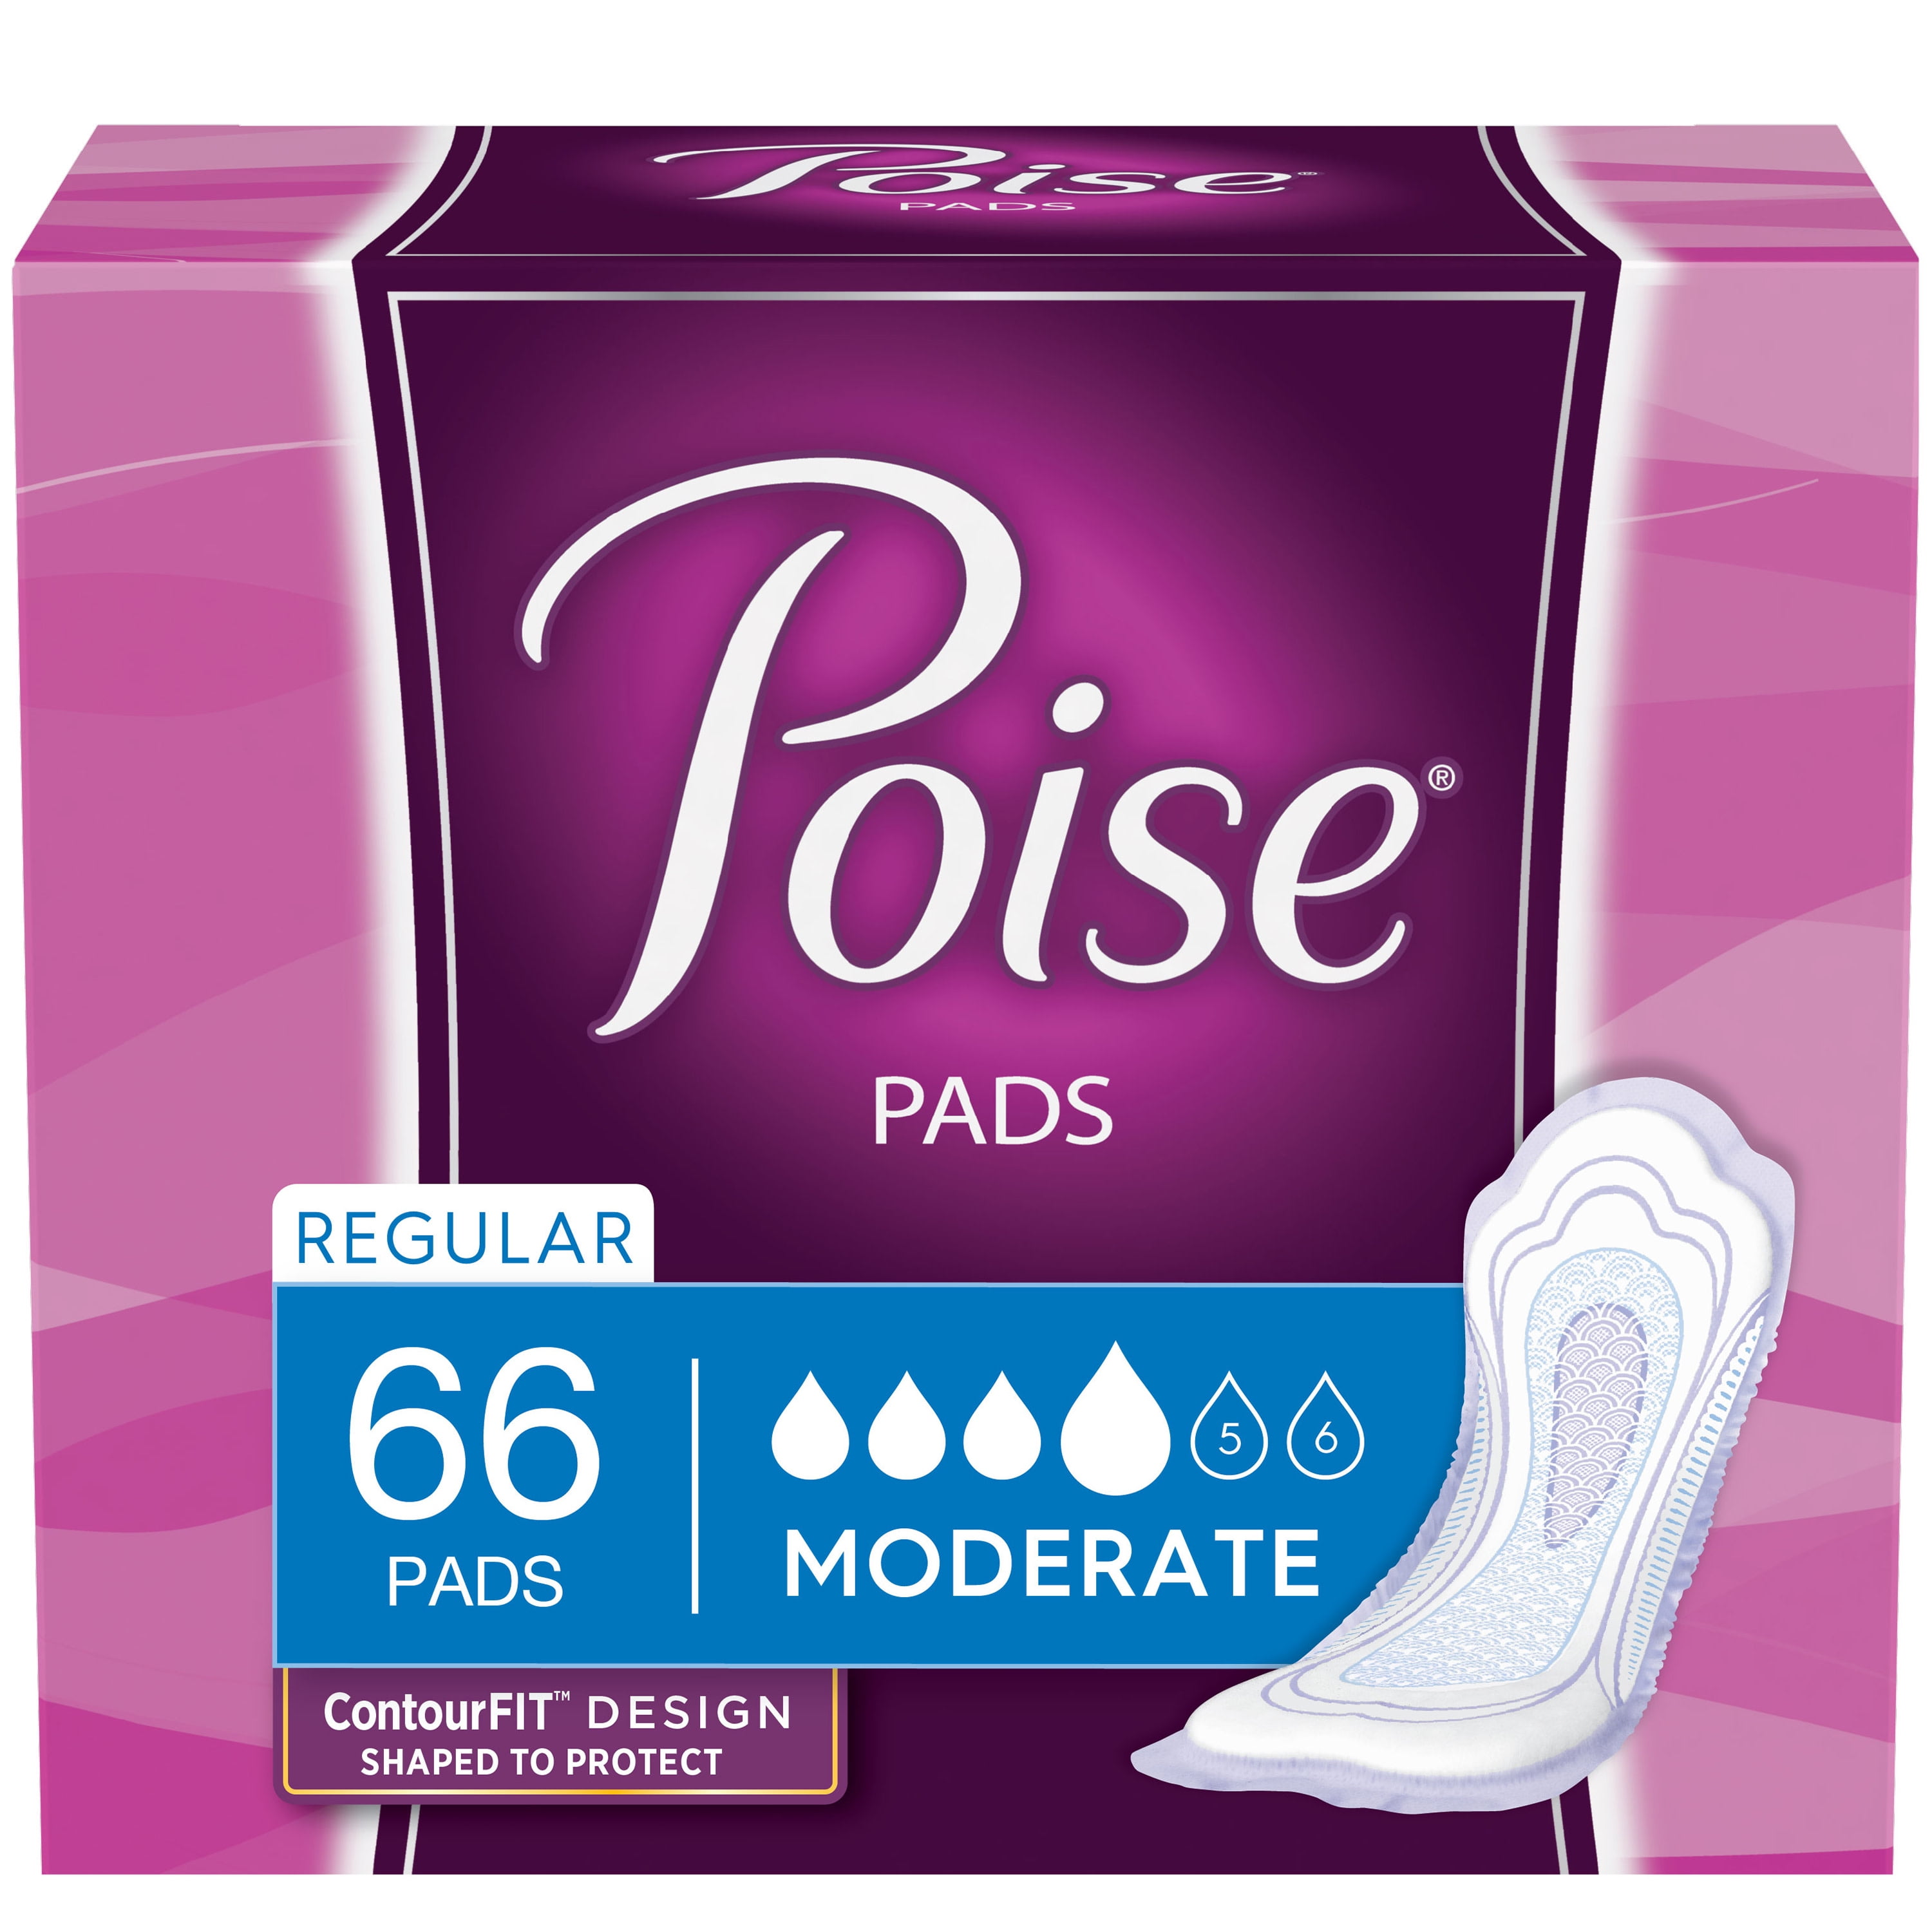 Poise Incontinence Pads for Women, 4 Drop, Moderate Absorbency, Regular, 66Ct